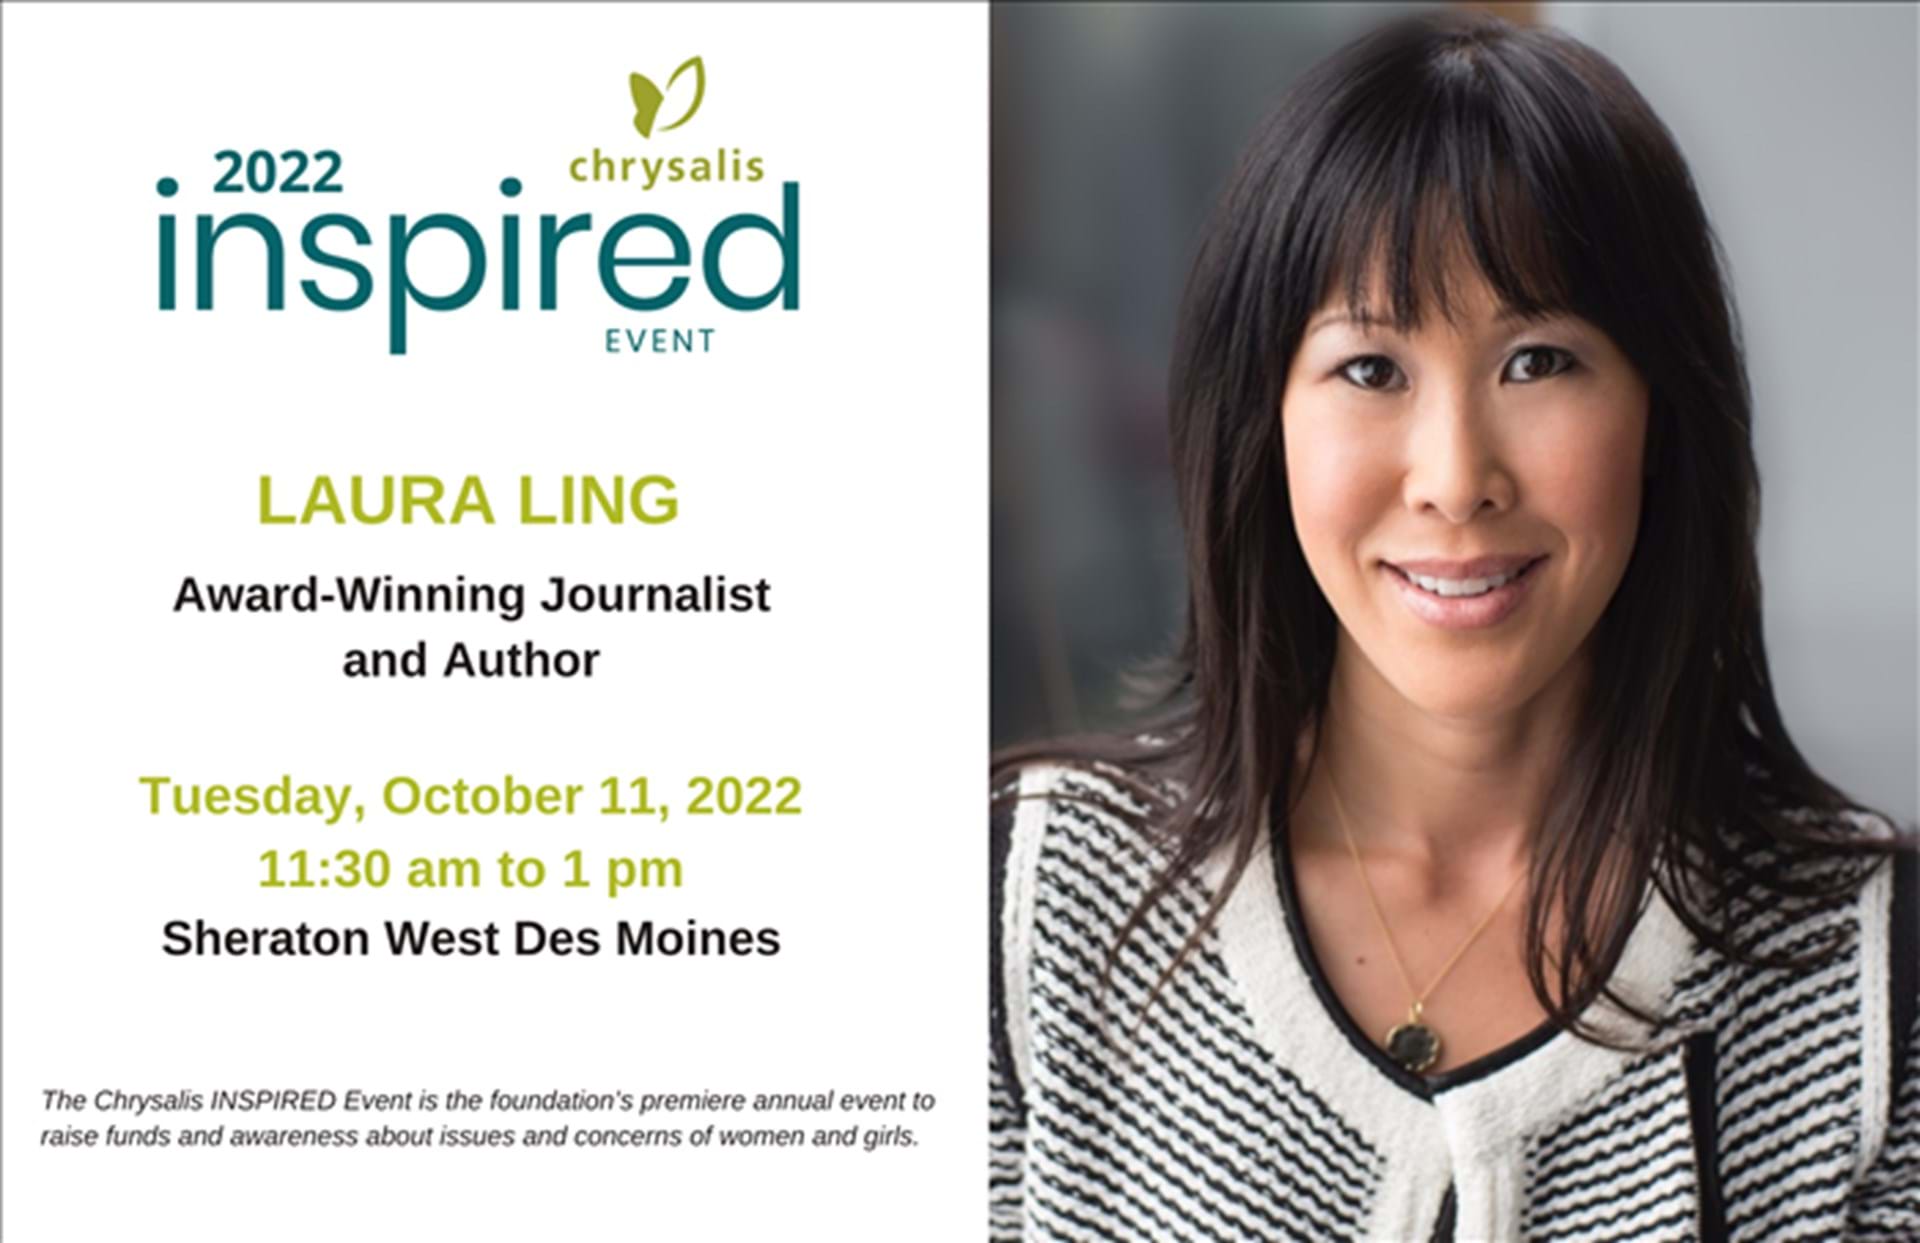 Chrysalis INSPIRED Event featuring Laura Ling